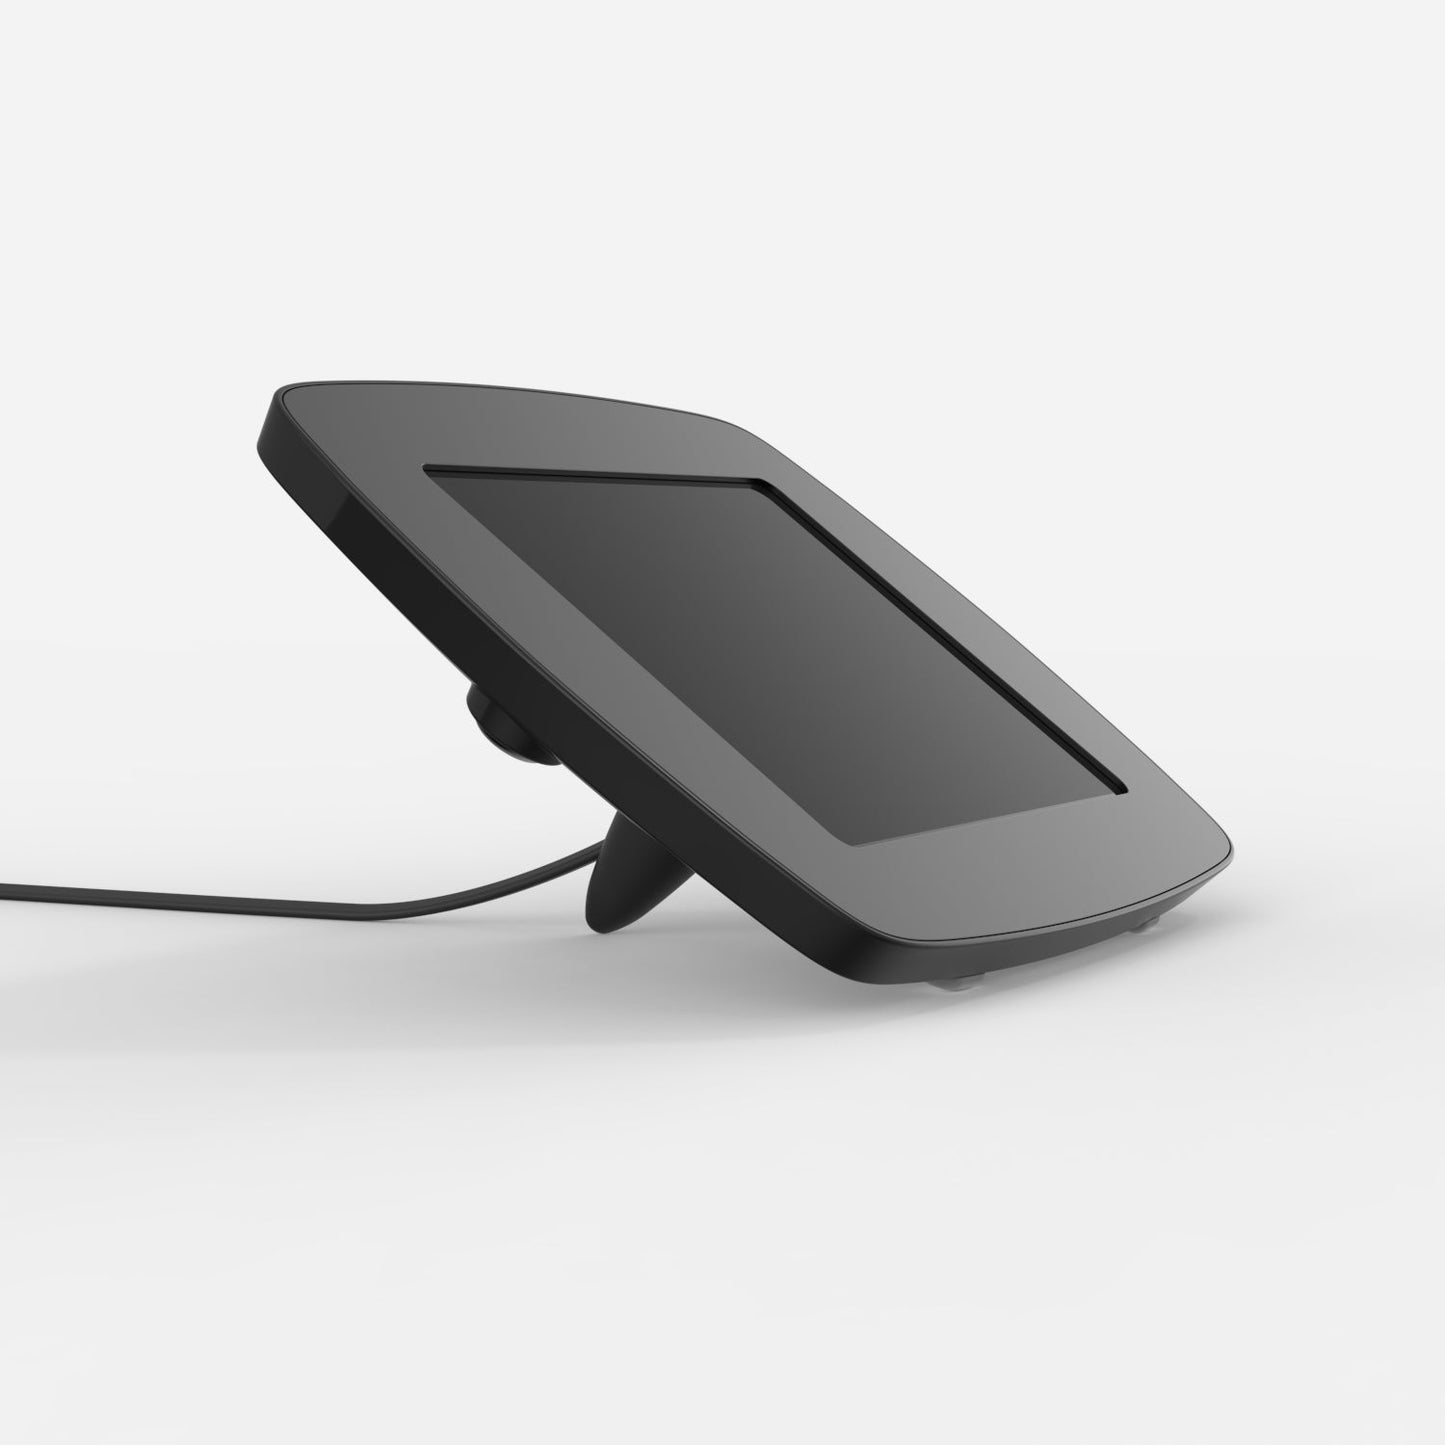 Bouncepad Lounge - A tethered tablet and iPad enclosure in black.